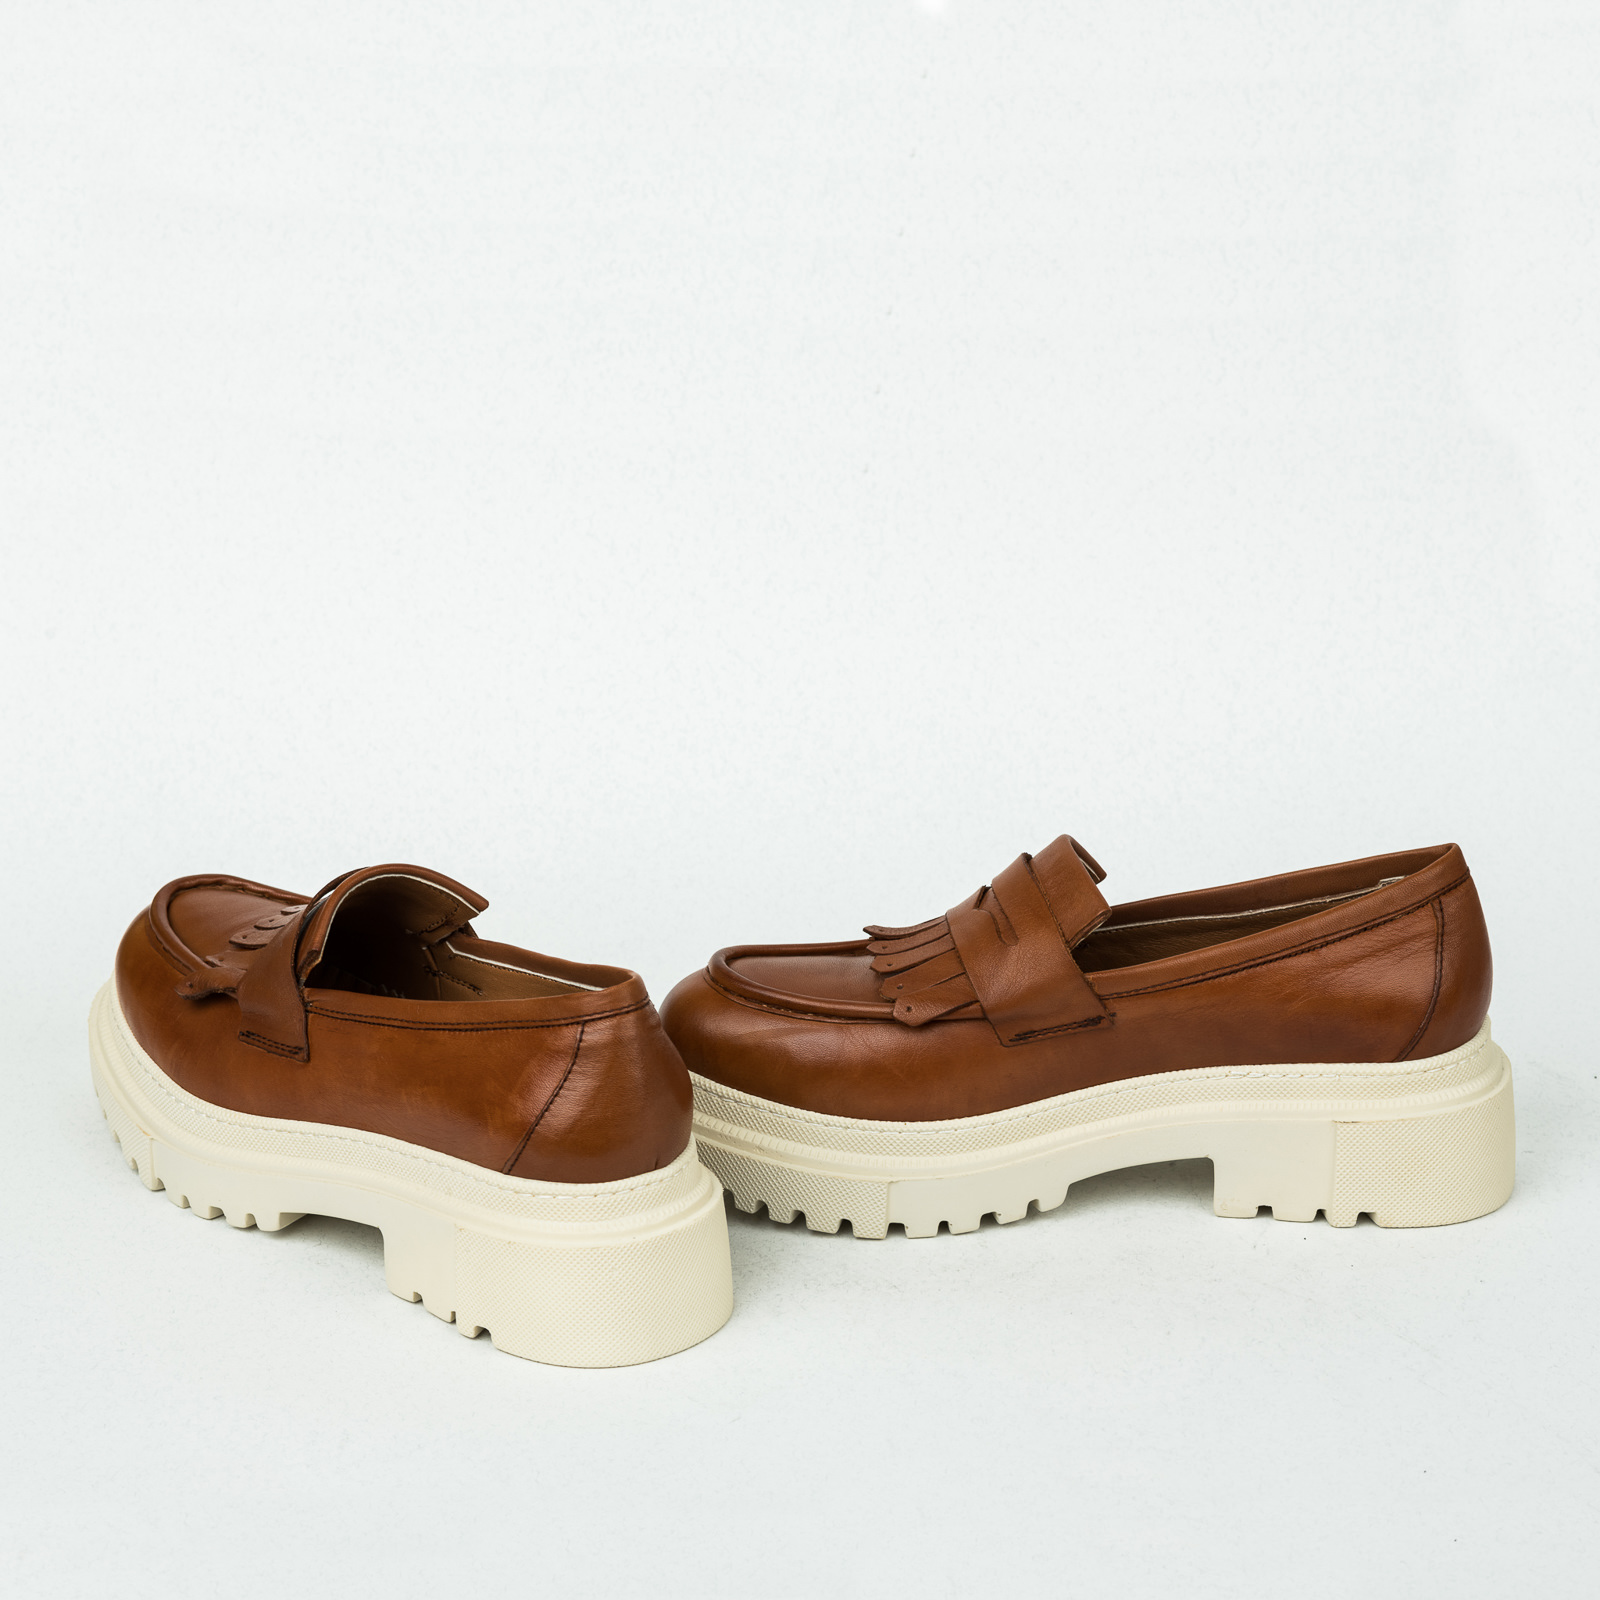 Leather shoes & flats B270 - CAMEL